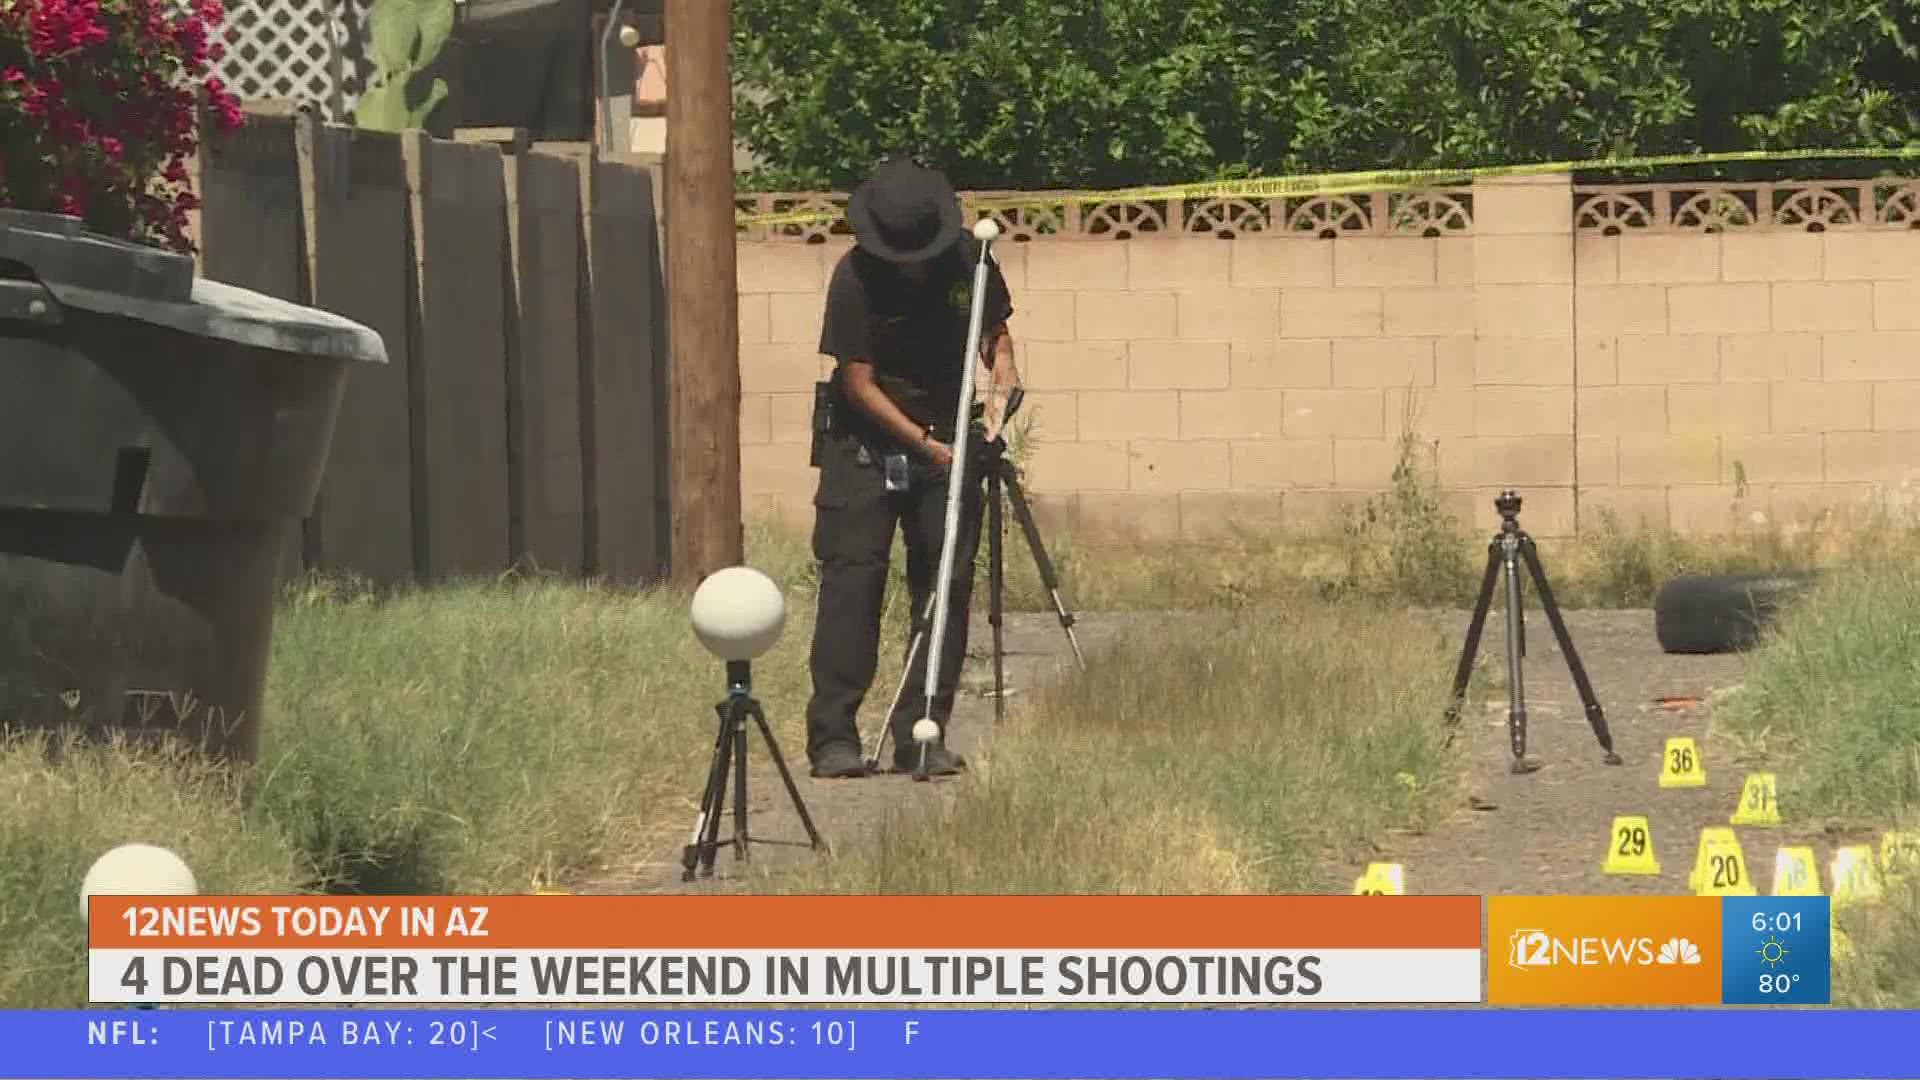 Multiple shootings left four people dead in Phoenix over a violent weekend. Jen Wahl has more on the incidents and what police are doing to stop gun violence.